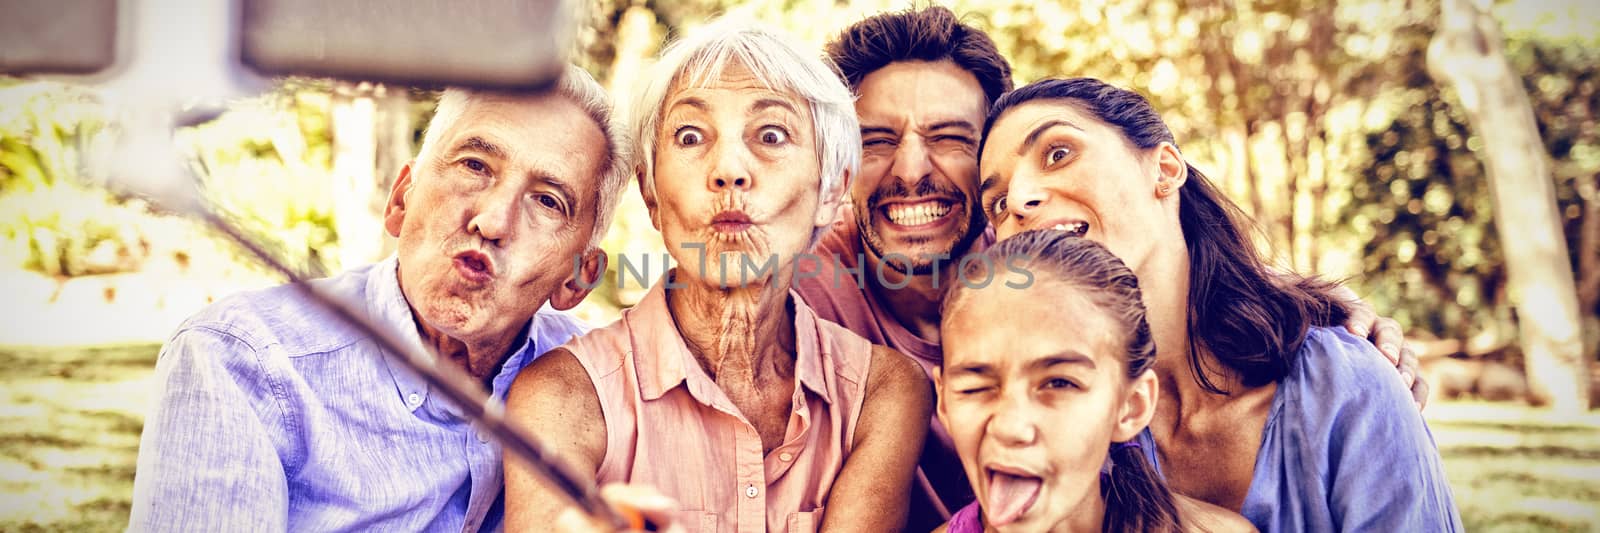 Playful family making funny faces while taking a selfie in the park